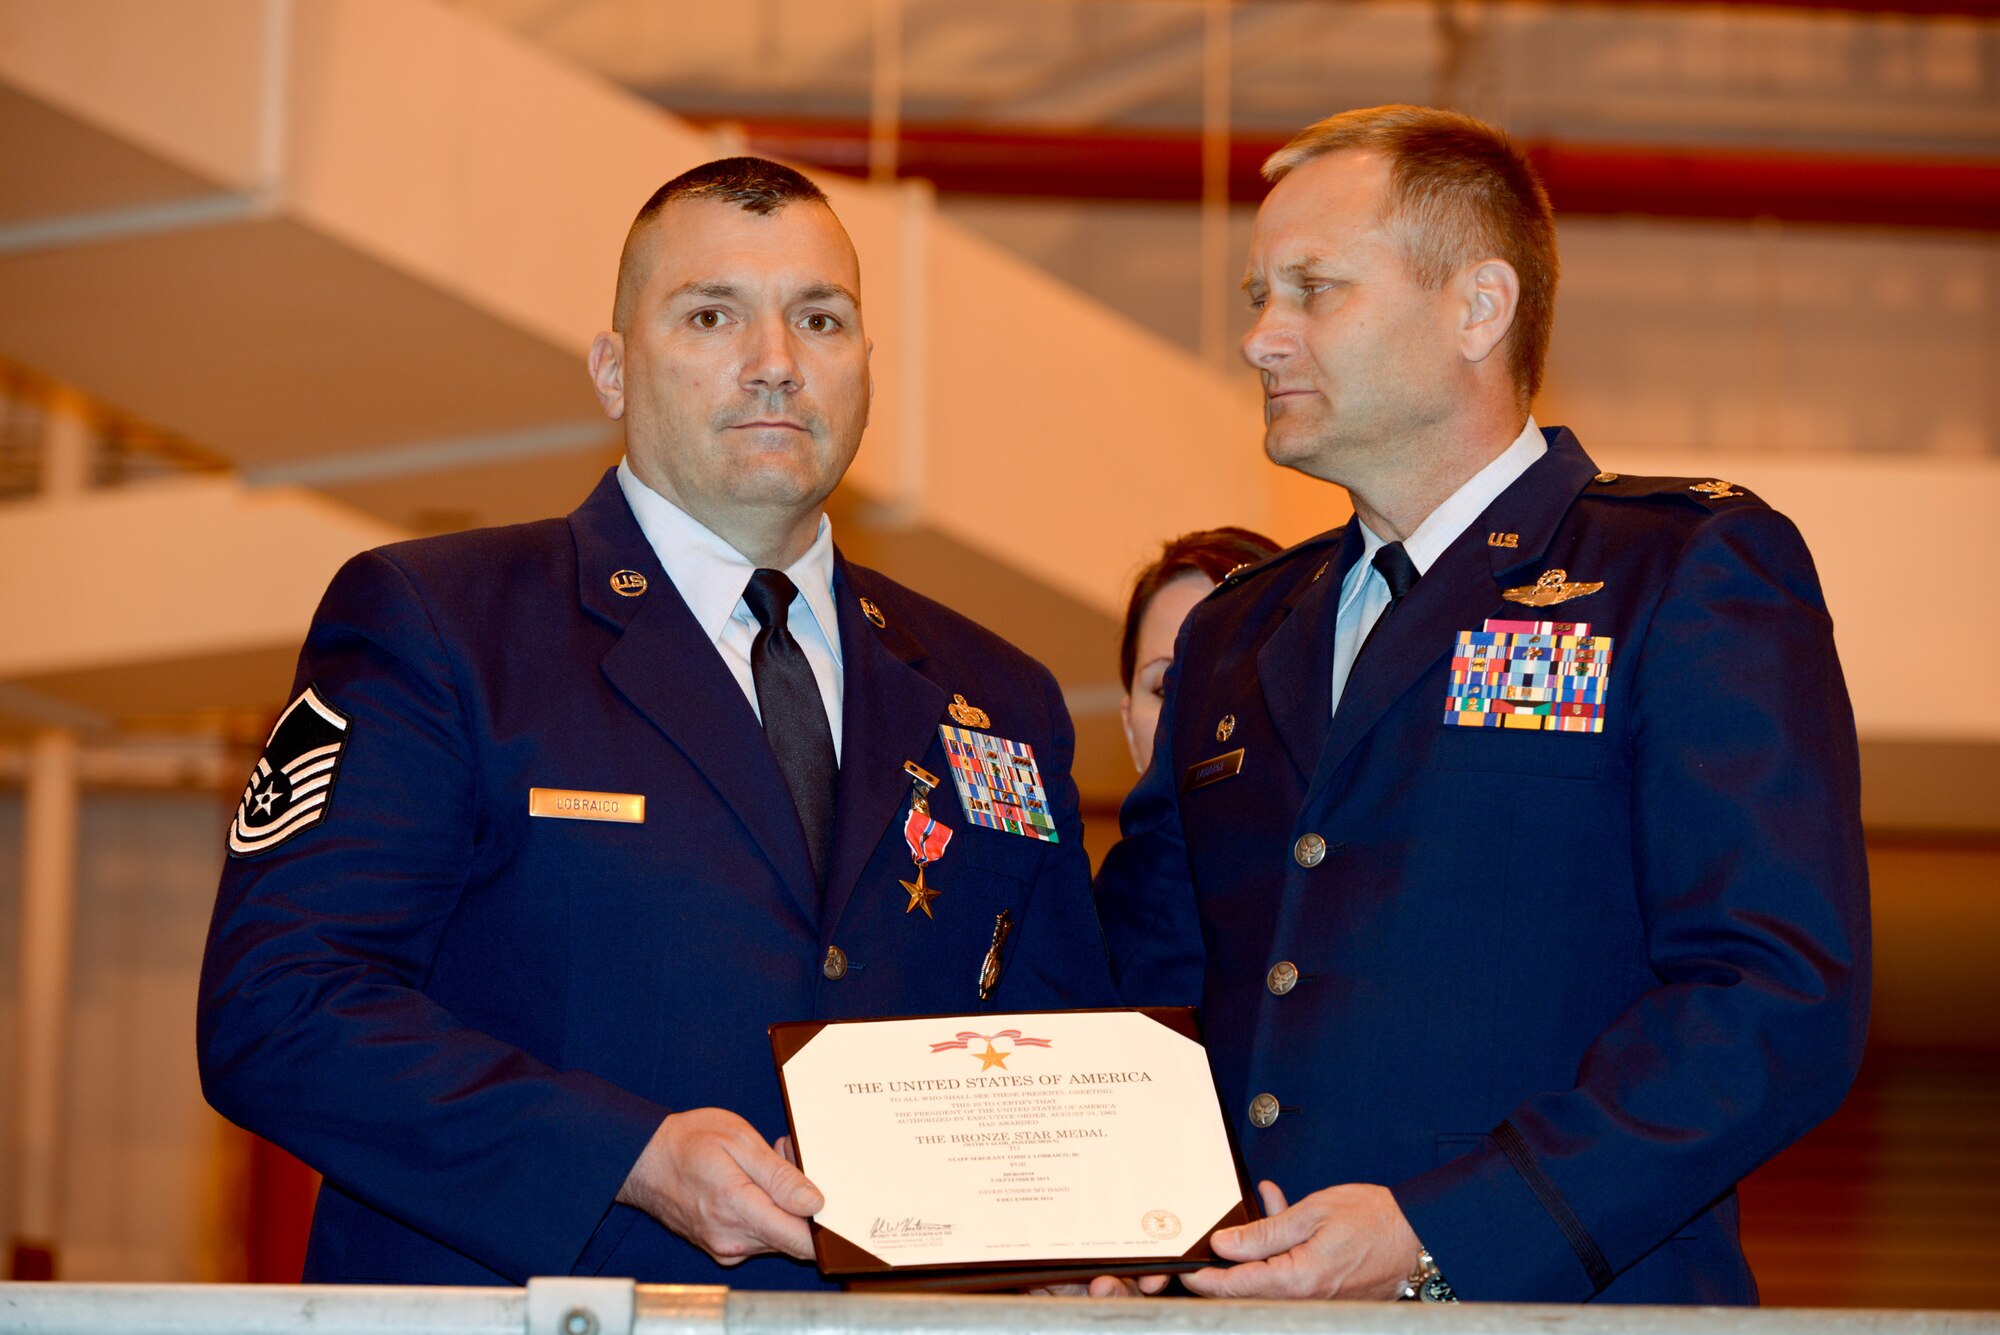 U.S. Air Force  Master Sgt. Todd Lobraico and Col Timothy J. LaBarge, commander of the 105th Airlift Wing, New York Air National Guard, show the posthumous award of the Bronze Star Medal with Valor to his son SSgt. Todd "T.J." Lobraico, during a ceremony at Stewart Air National Guard Base on April 11, 2015. Lobraico Jr., a member of the 105th Airlift Wing, was killed in action in Afghanistan on Sept. 5, 2013, (U.S. Air National Guard photo by SSgt Michael OHalloran/Released) 